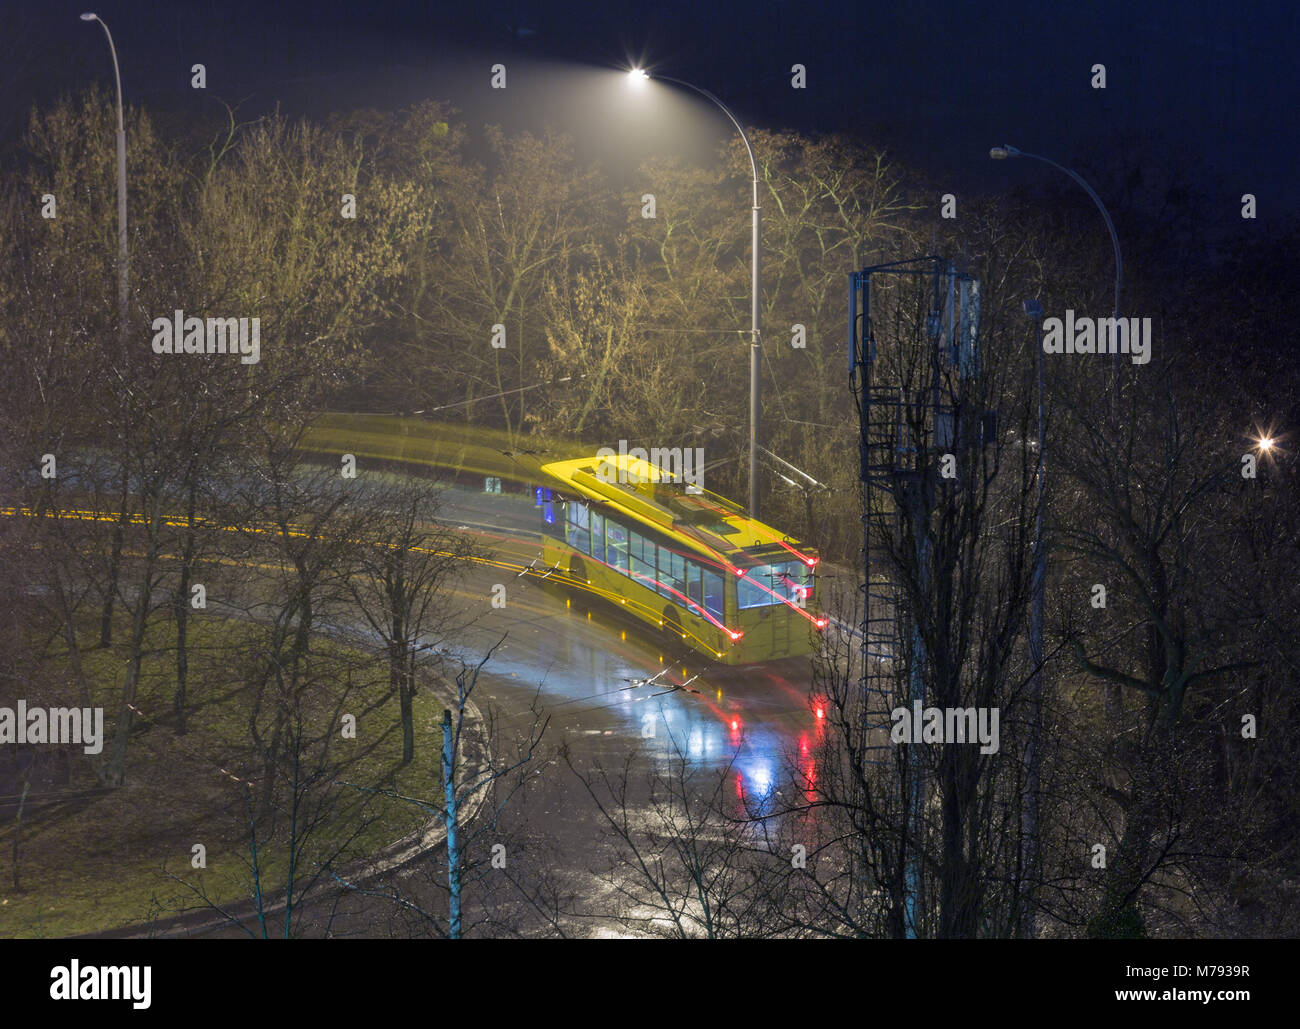 trolley bus on street at night in bad weather Stock Photo